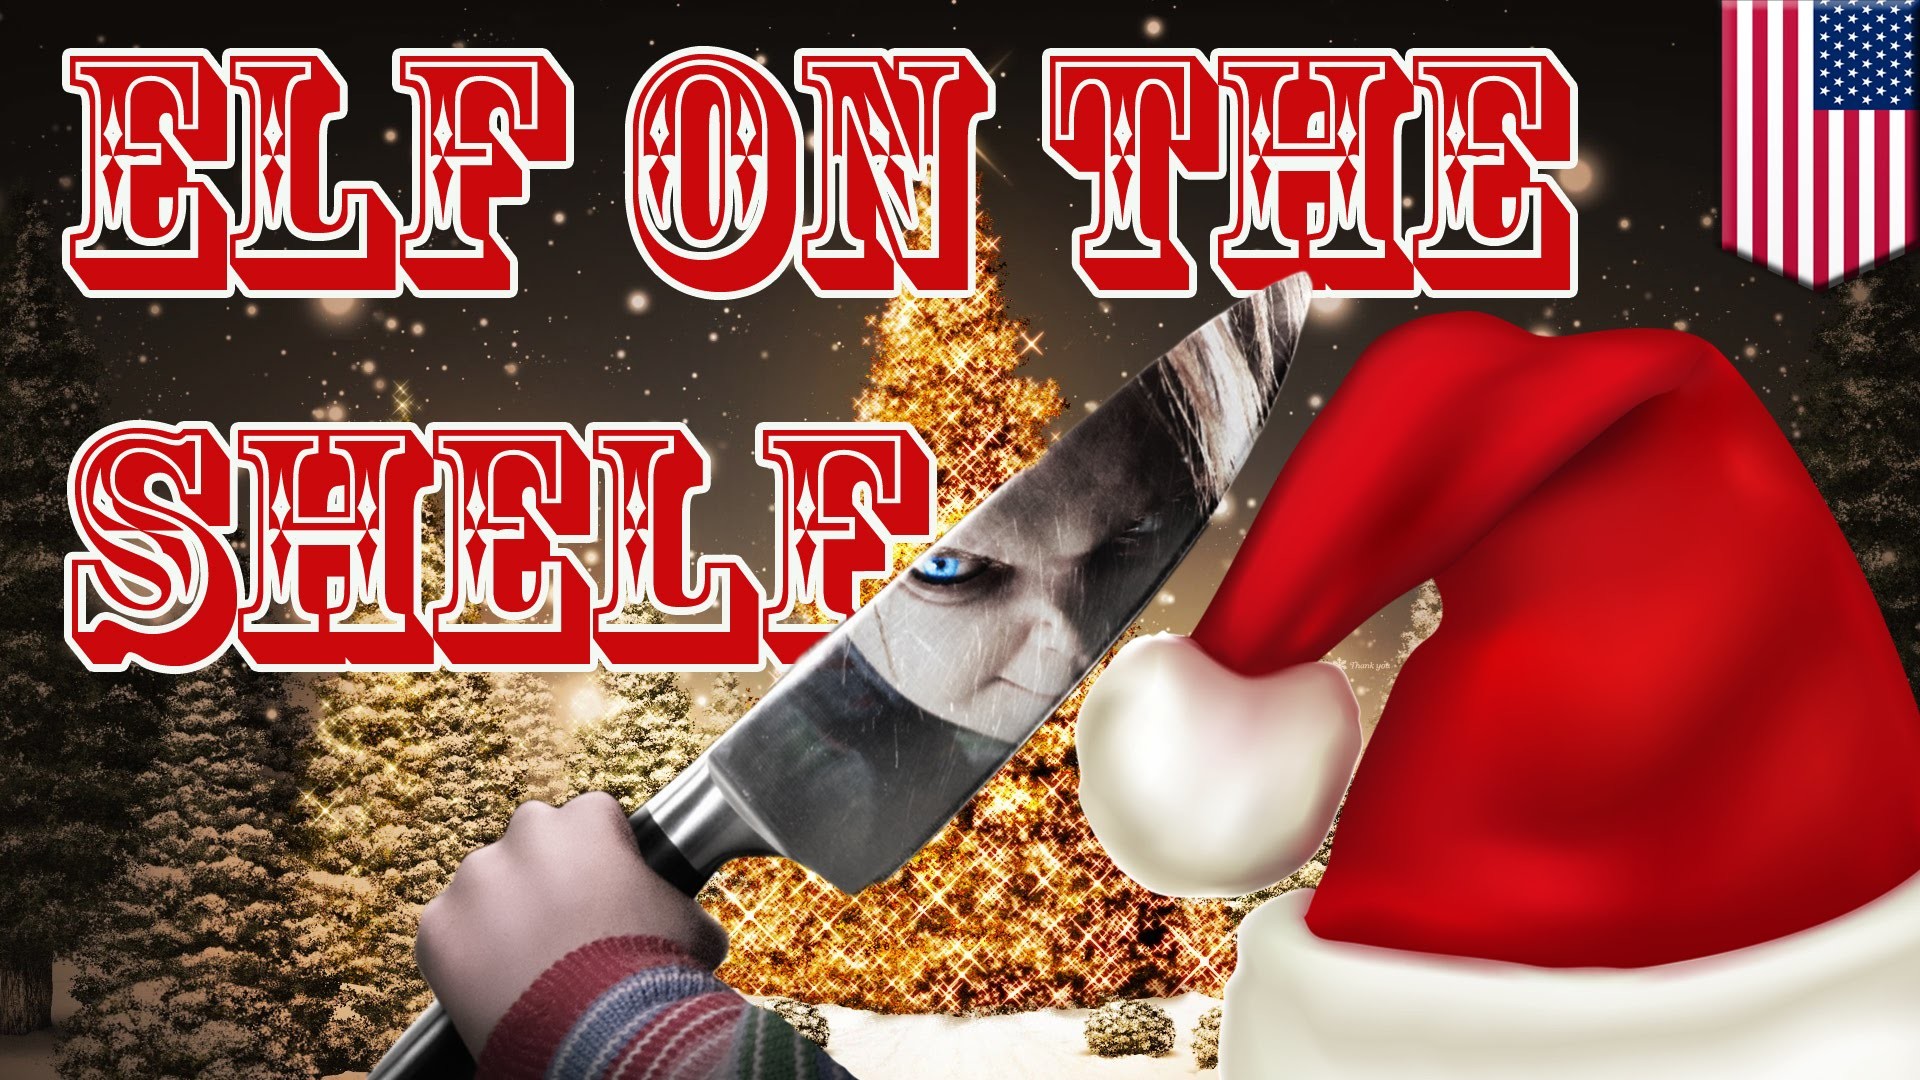 1920x1080 Christmas Elf on the Shelf is moving! Hide your kids, hide your wife! -  YouTube